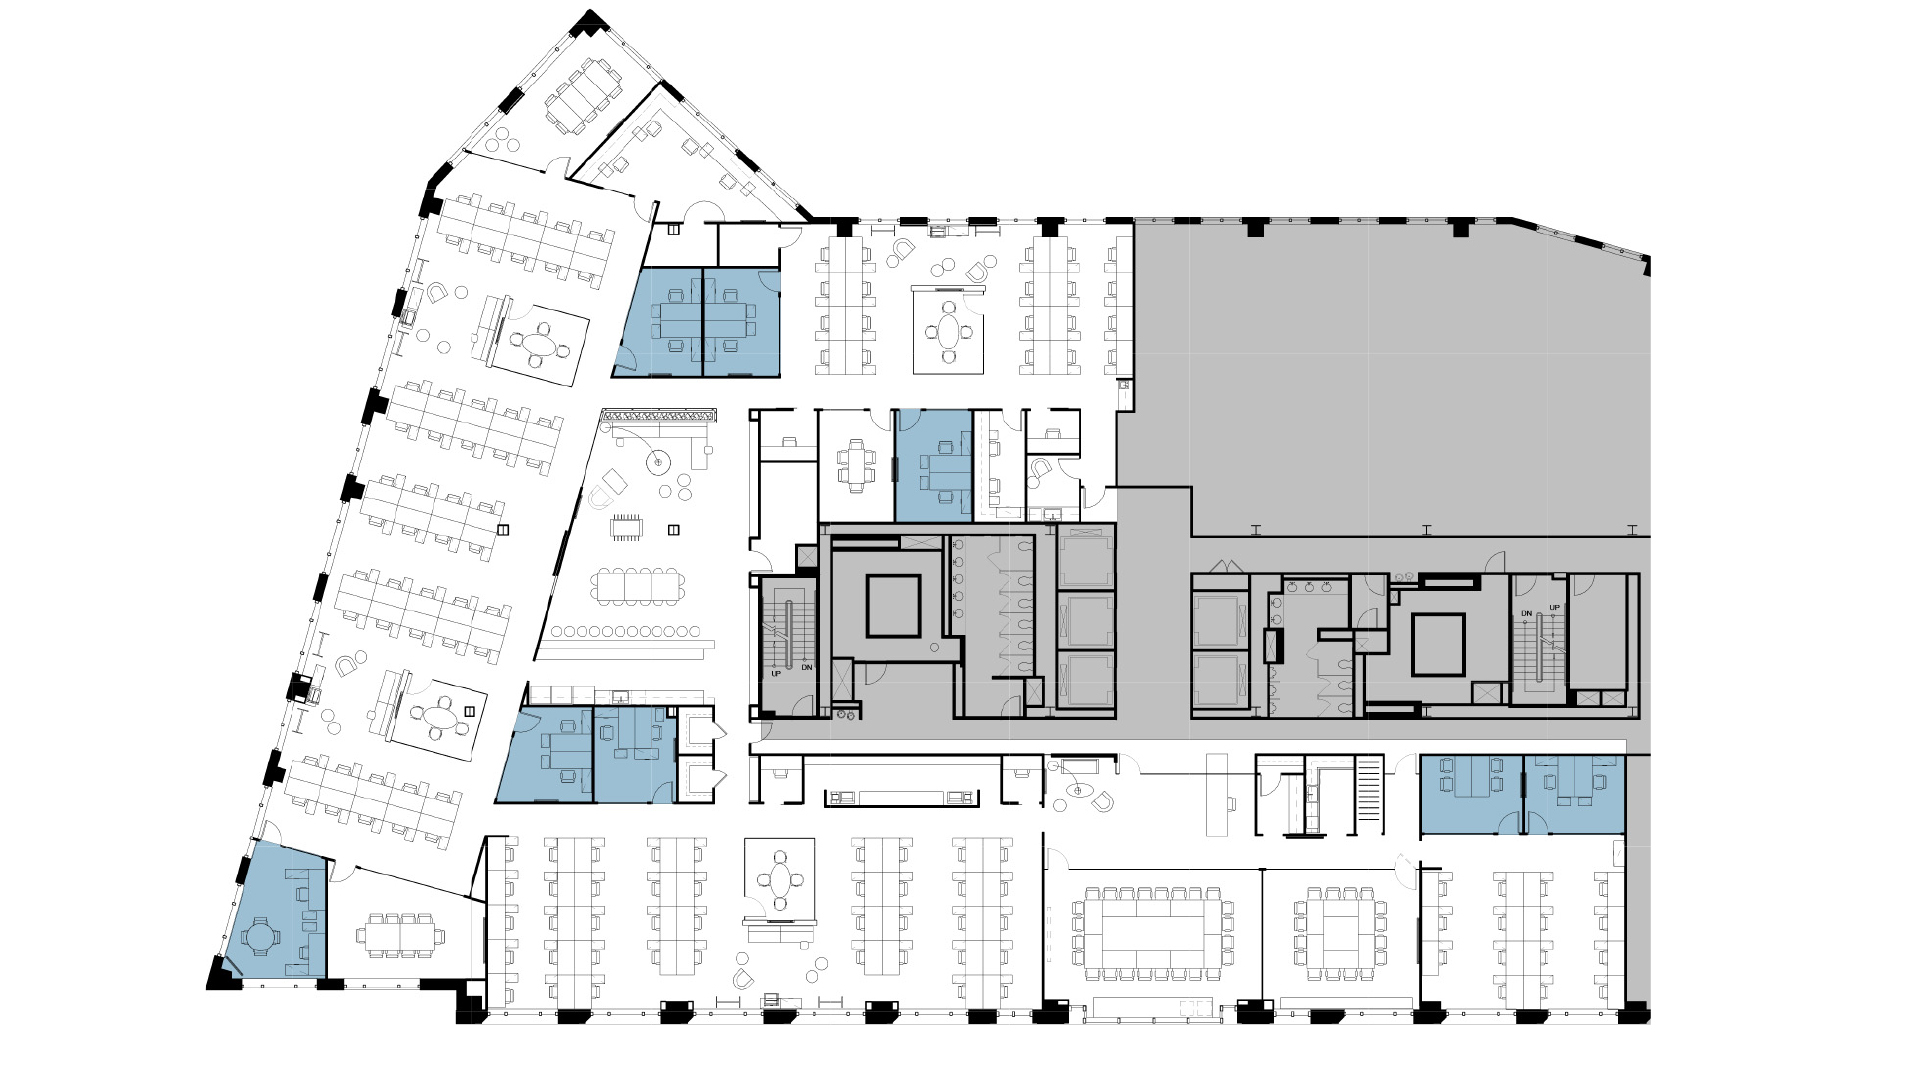 601 New Jersey Ave NW floor plan